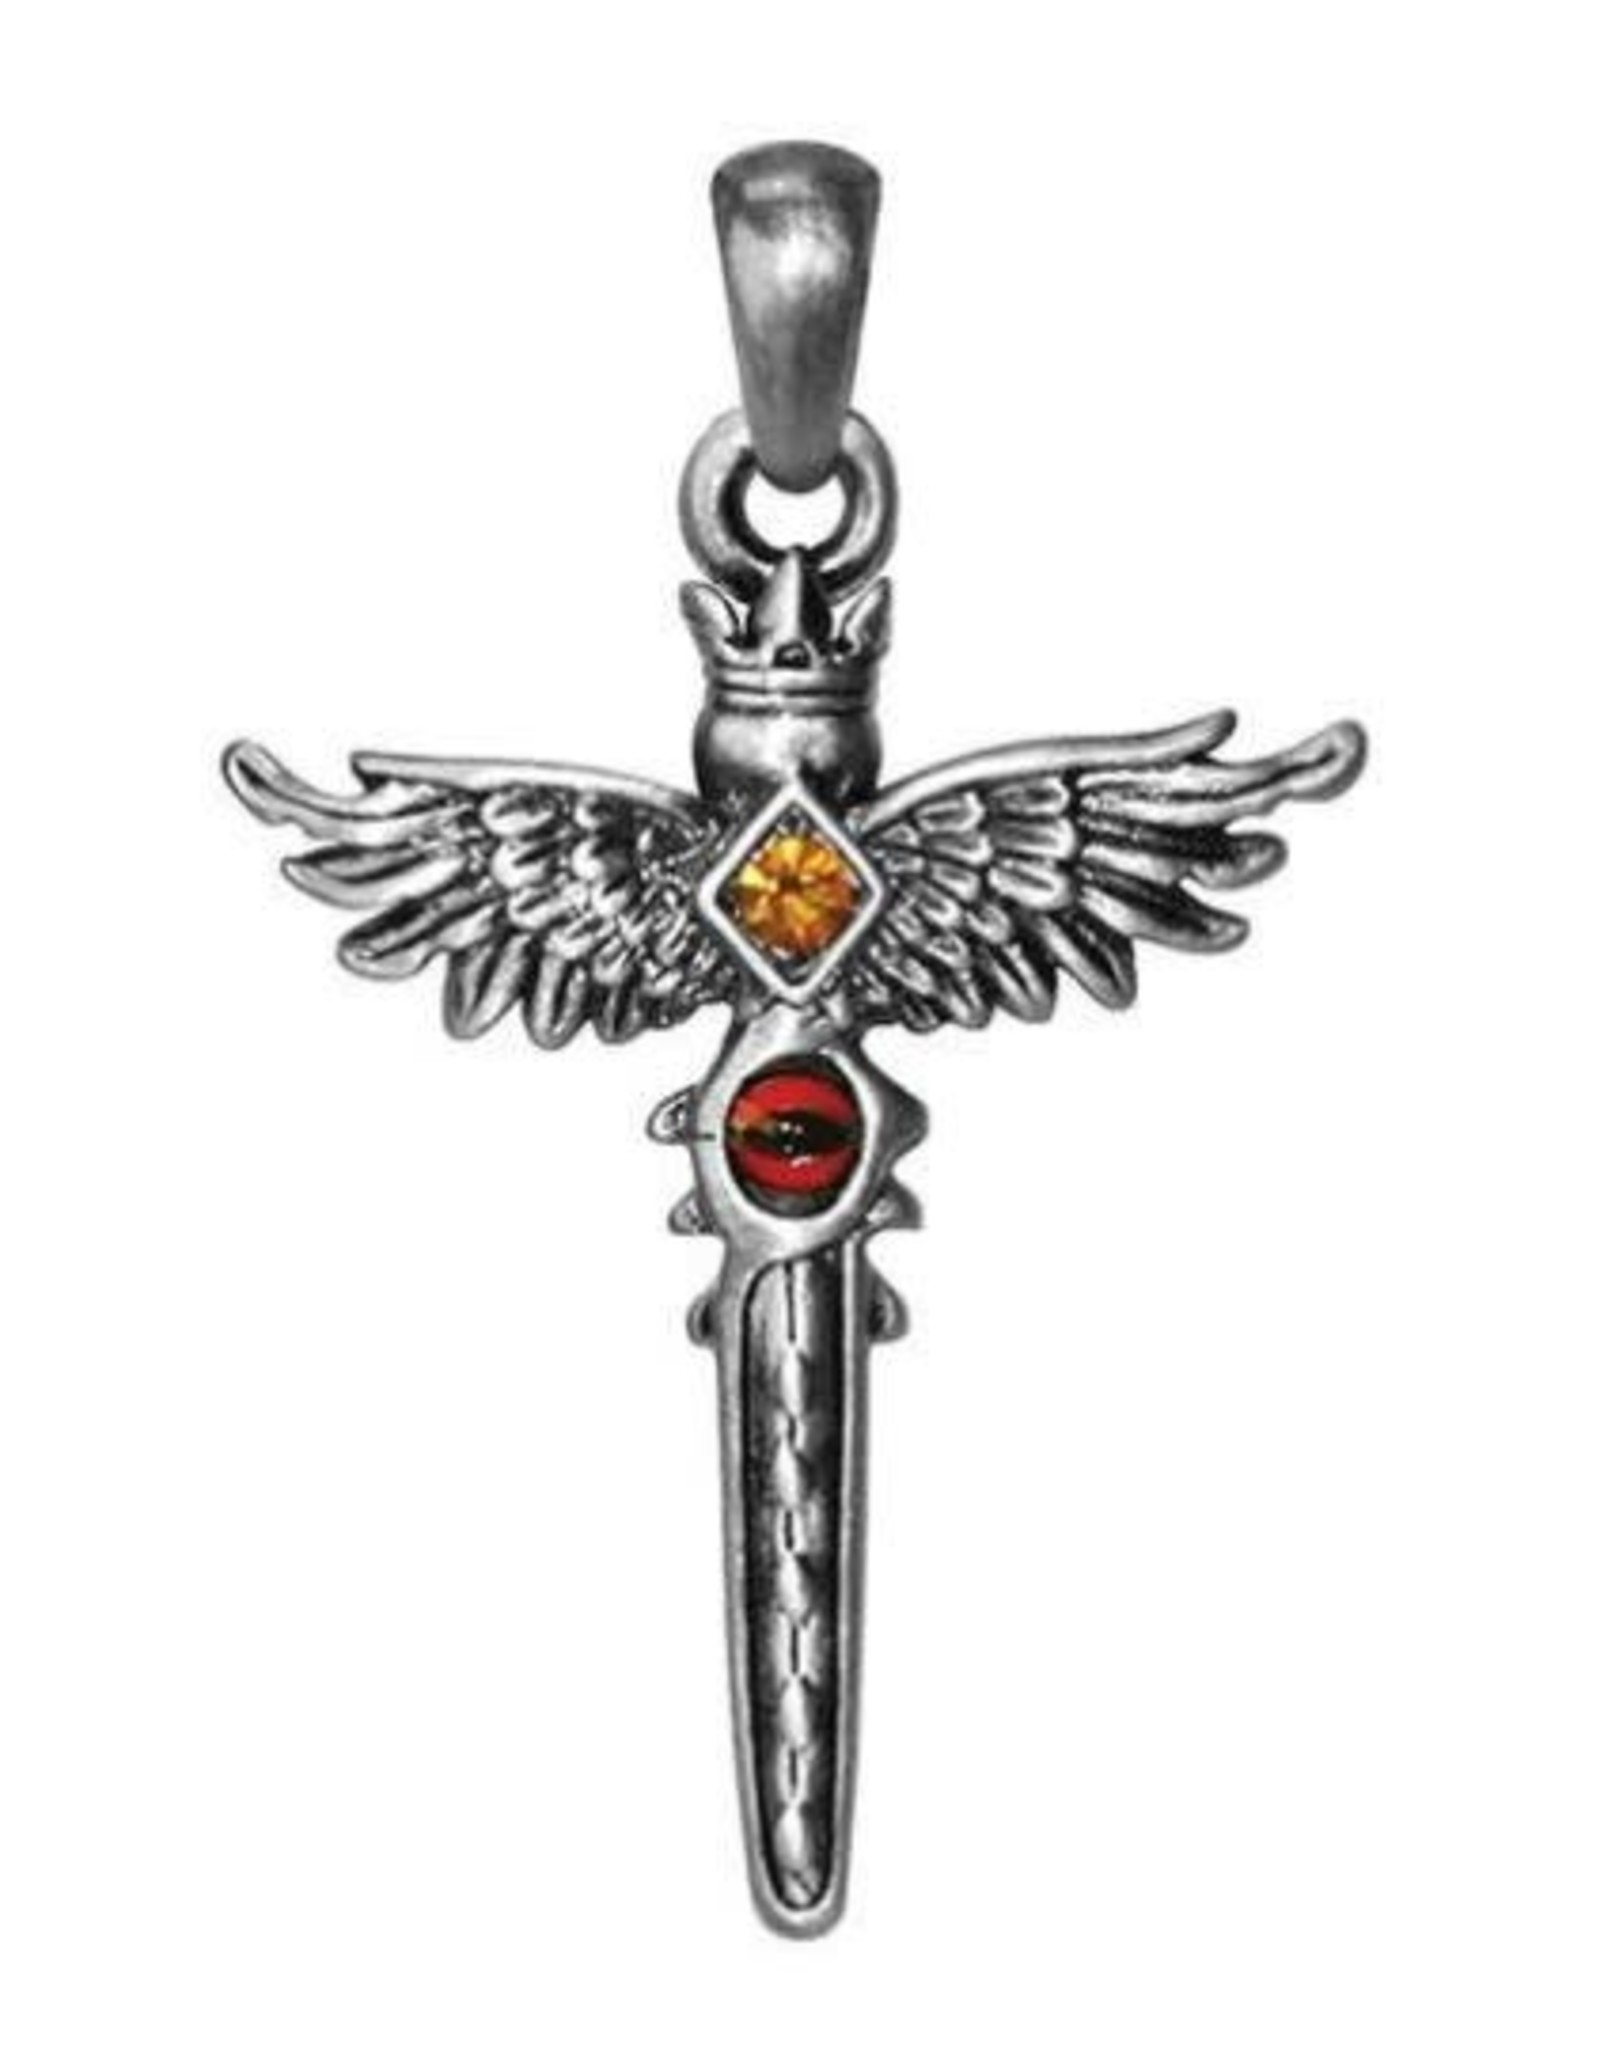 Winged Sword Pendant with cord 2" x 1.25"